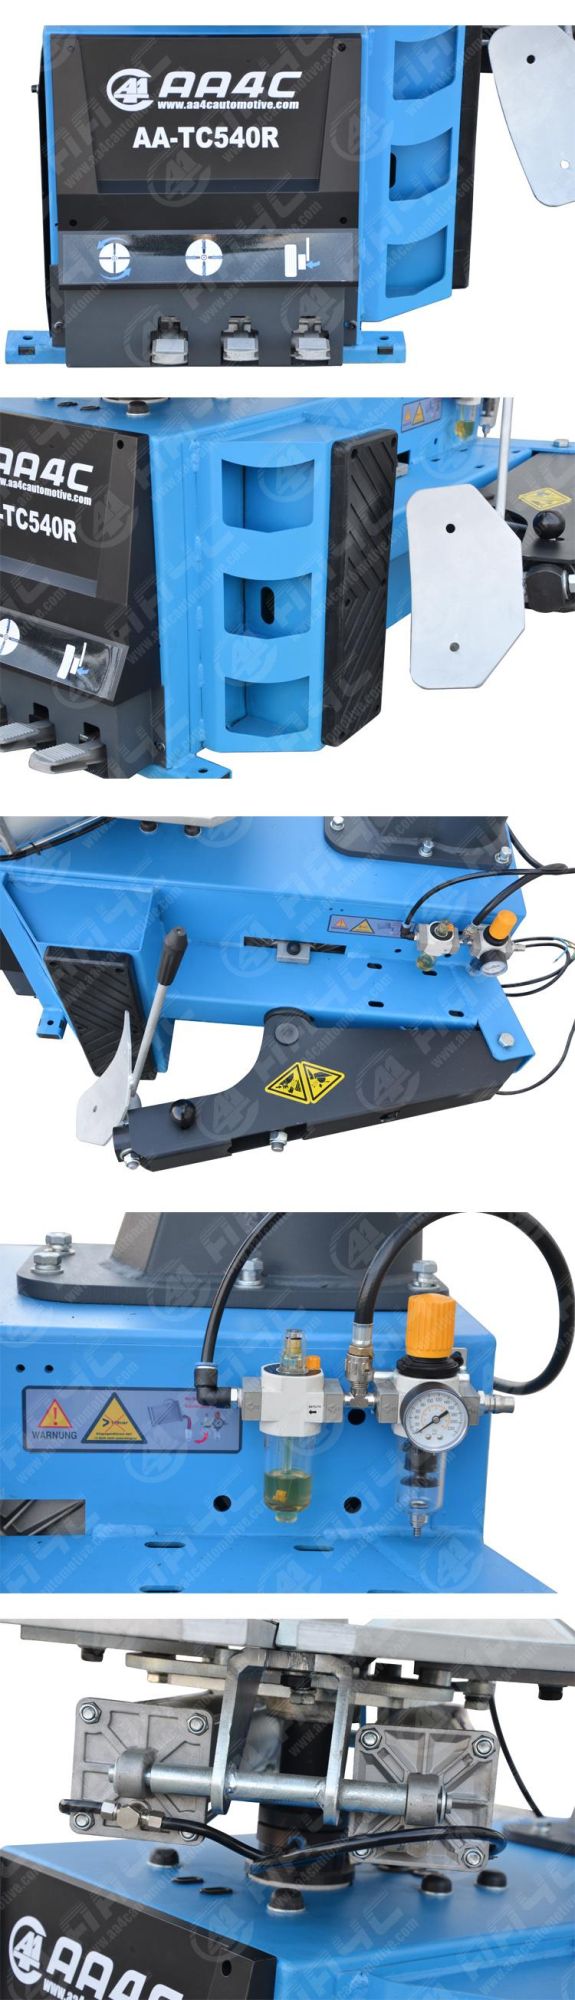 AA4c Tire Changer Tire Changing Machine Tyre Changer with Helper AA-Tc540r